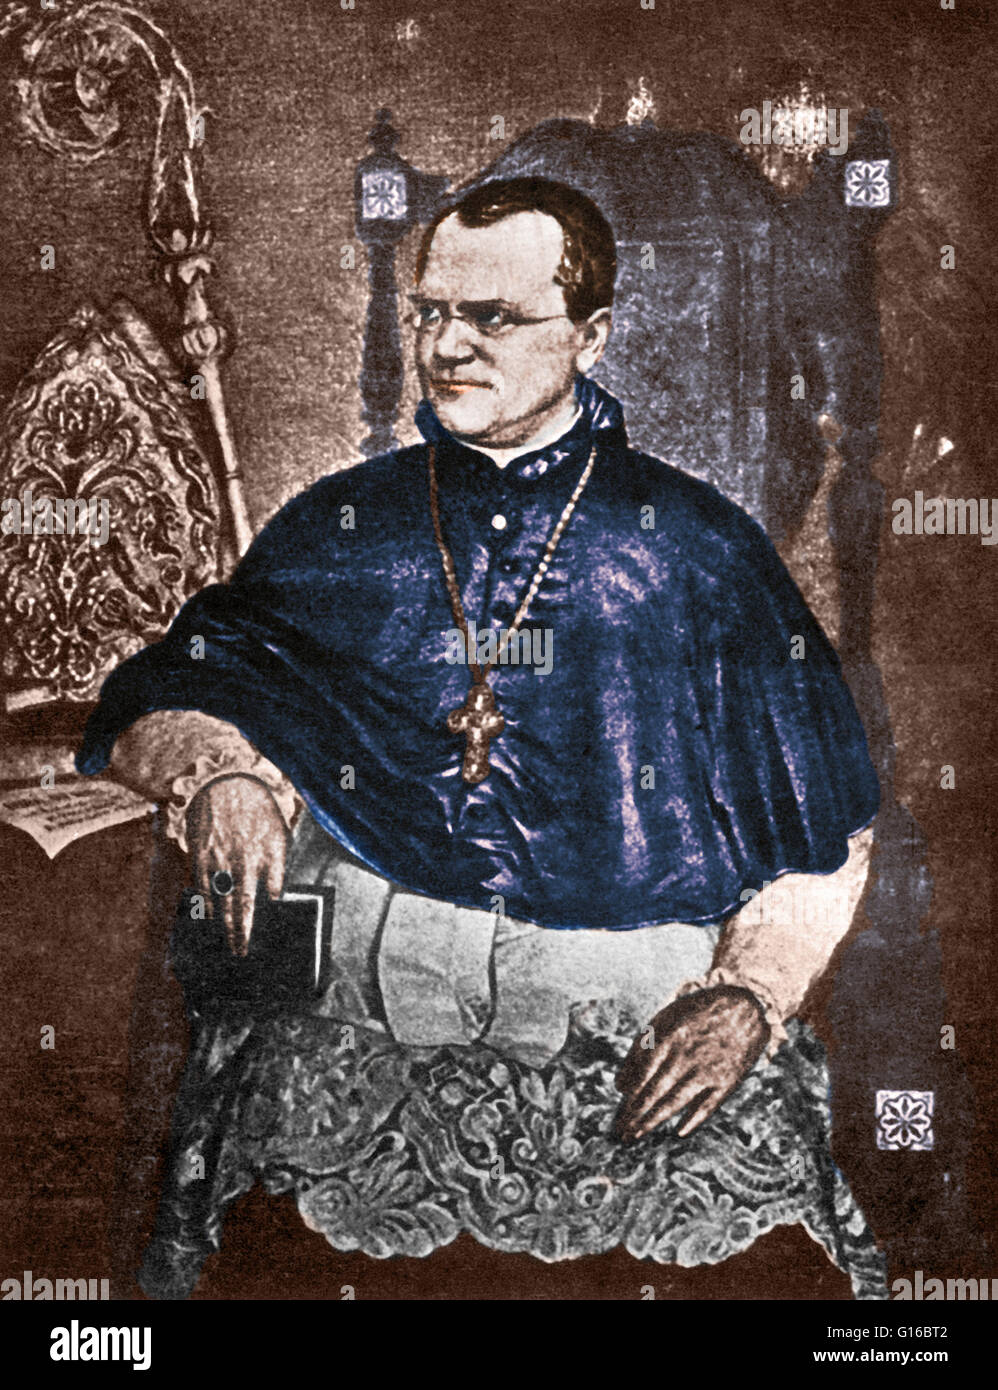 Gregor mendel Stock Photos and Images